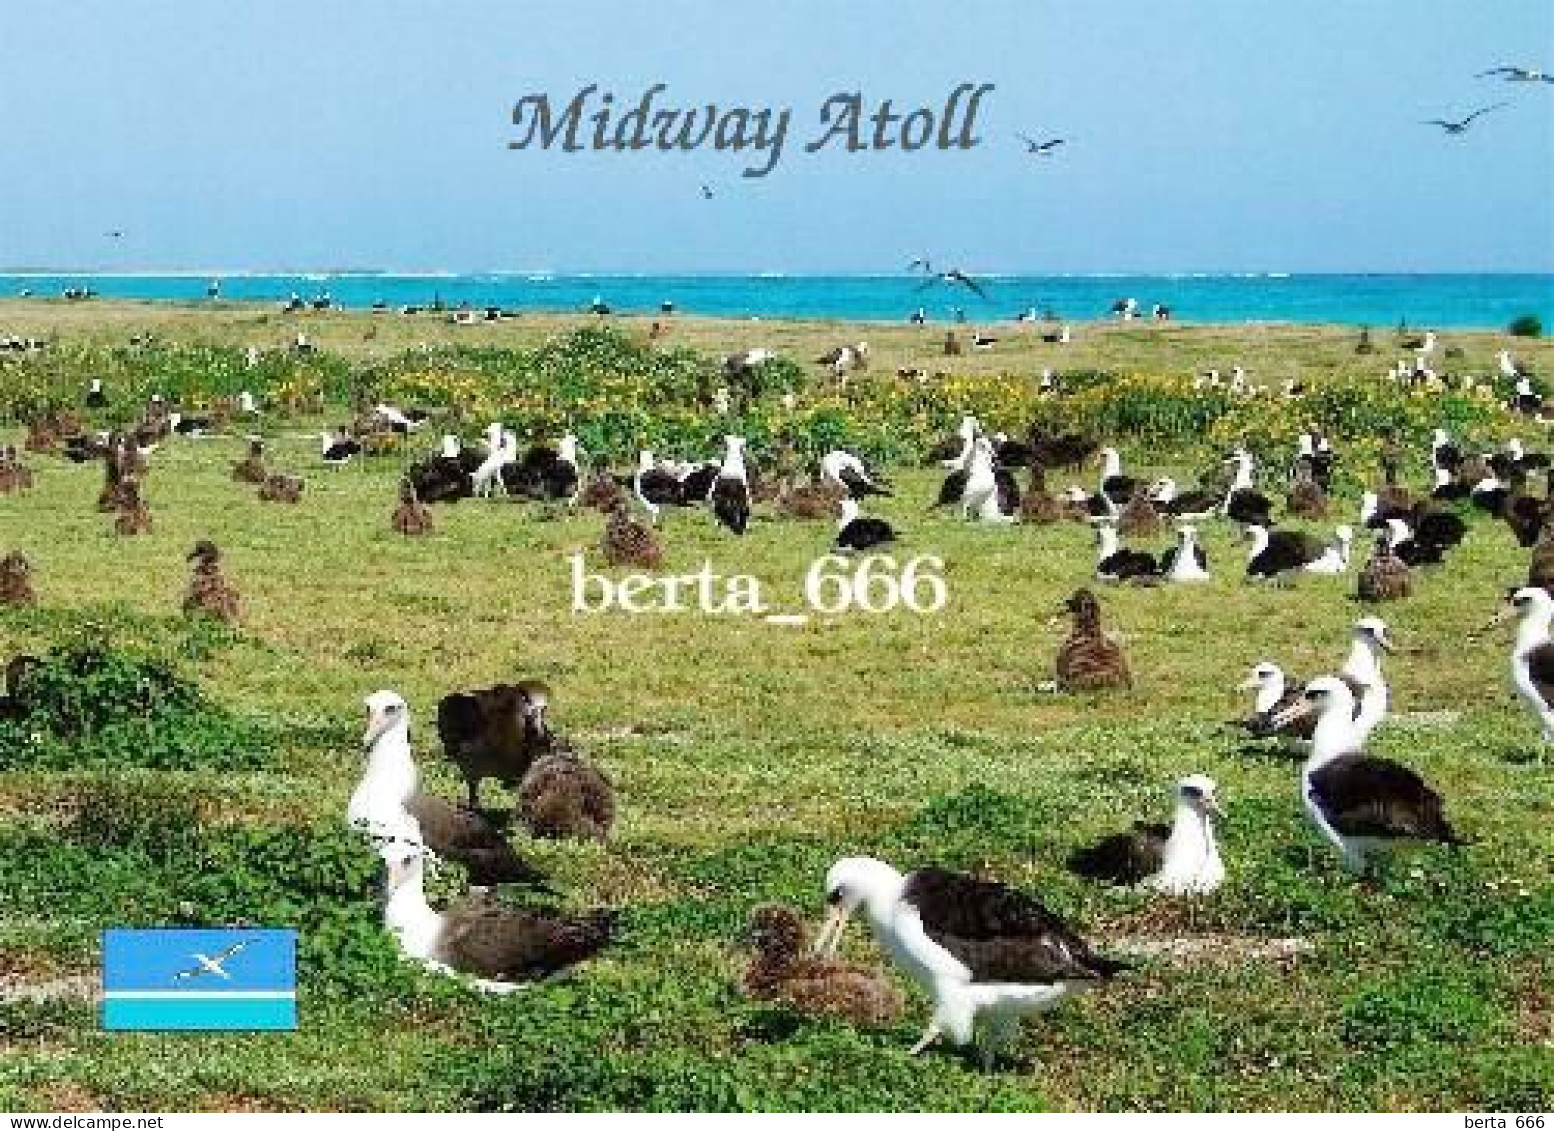 United States Midway Atoll Albatrosses New Postcard - Isole Midway